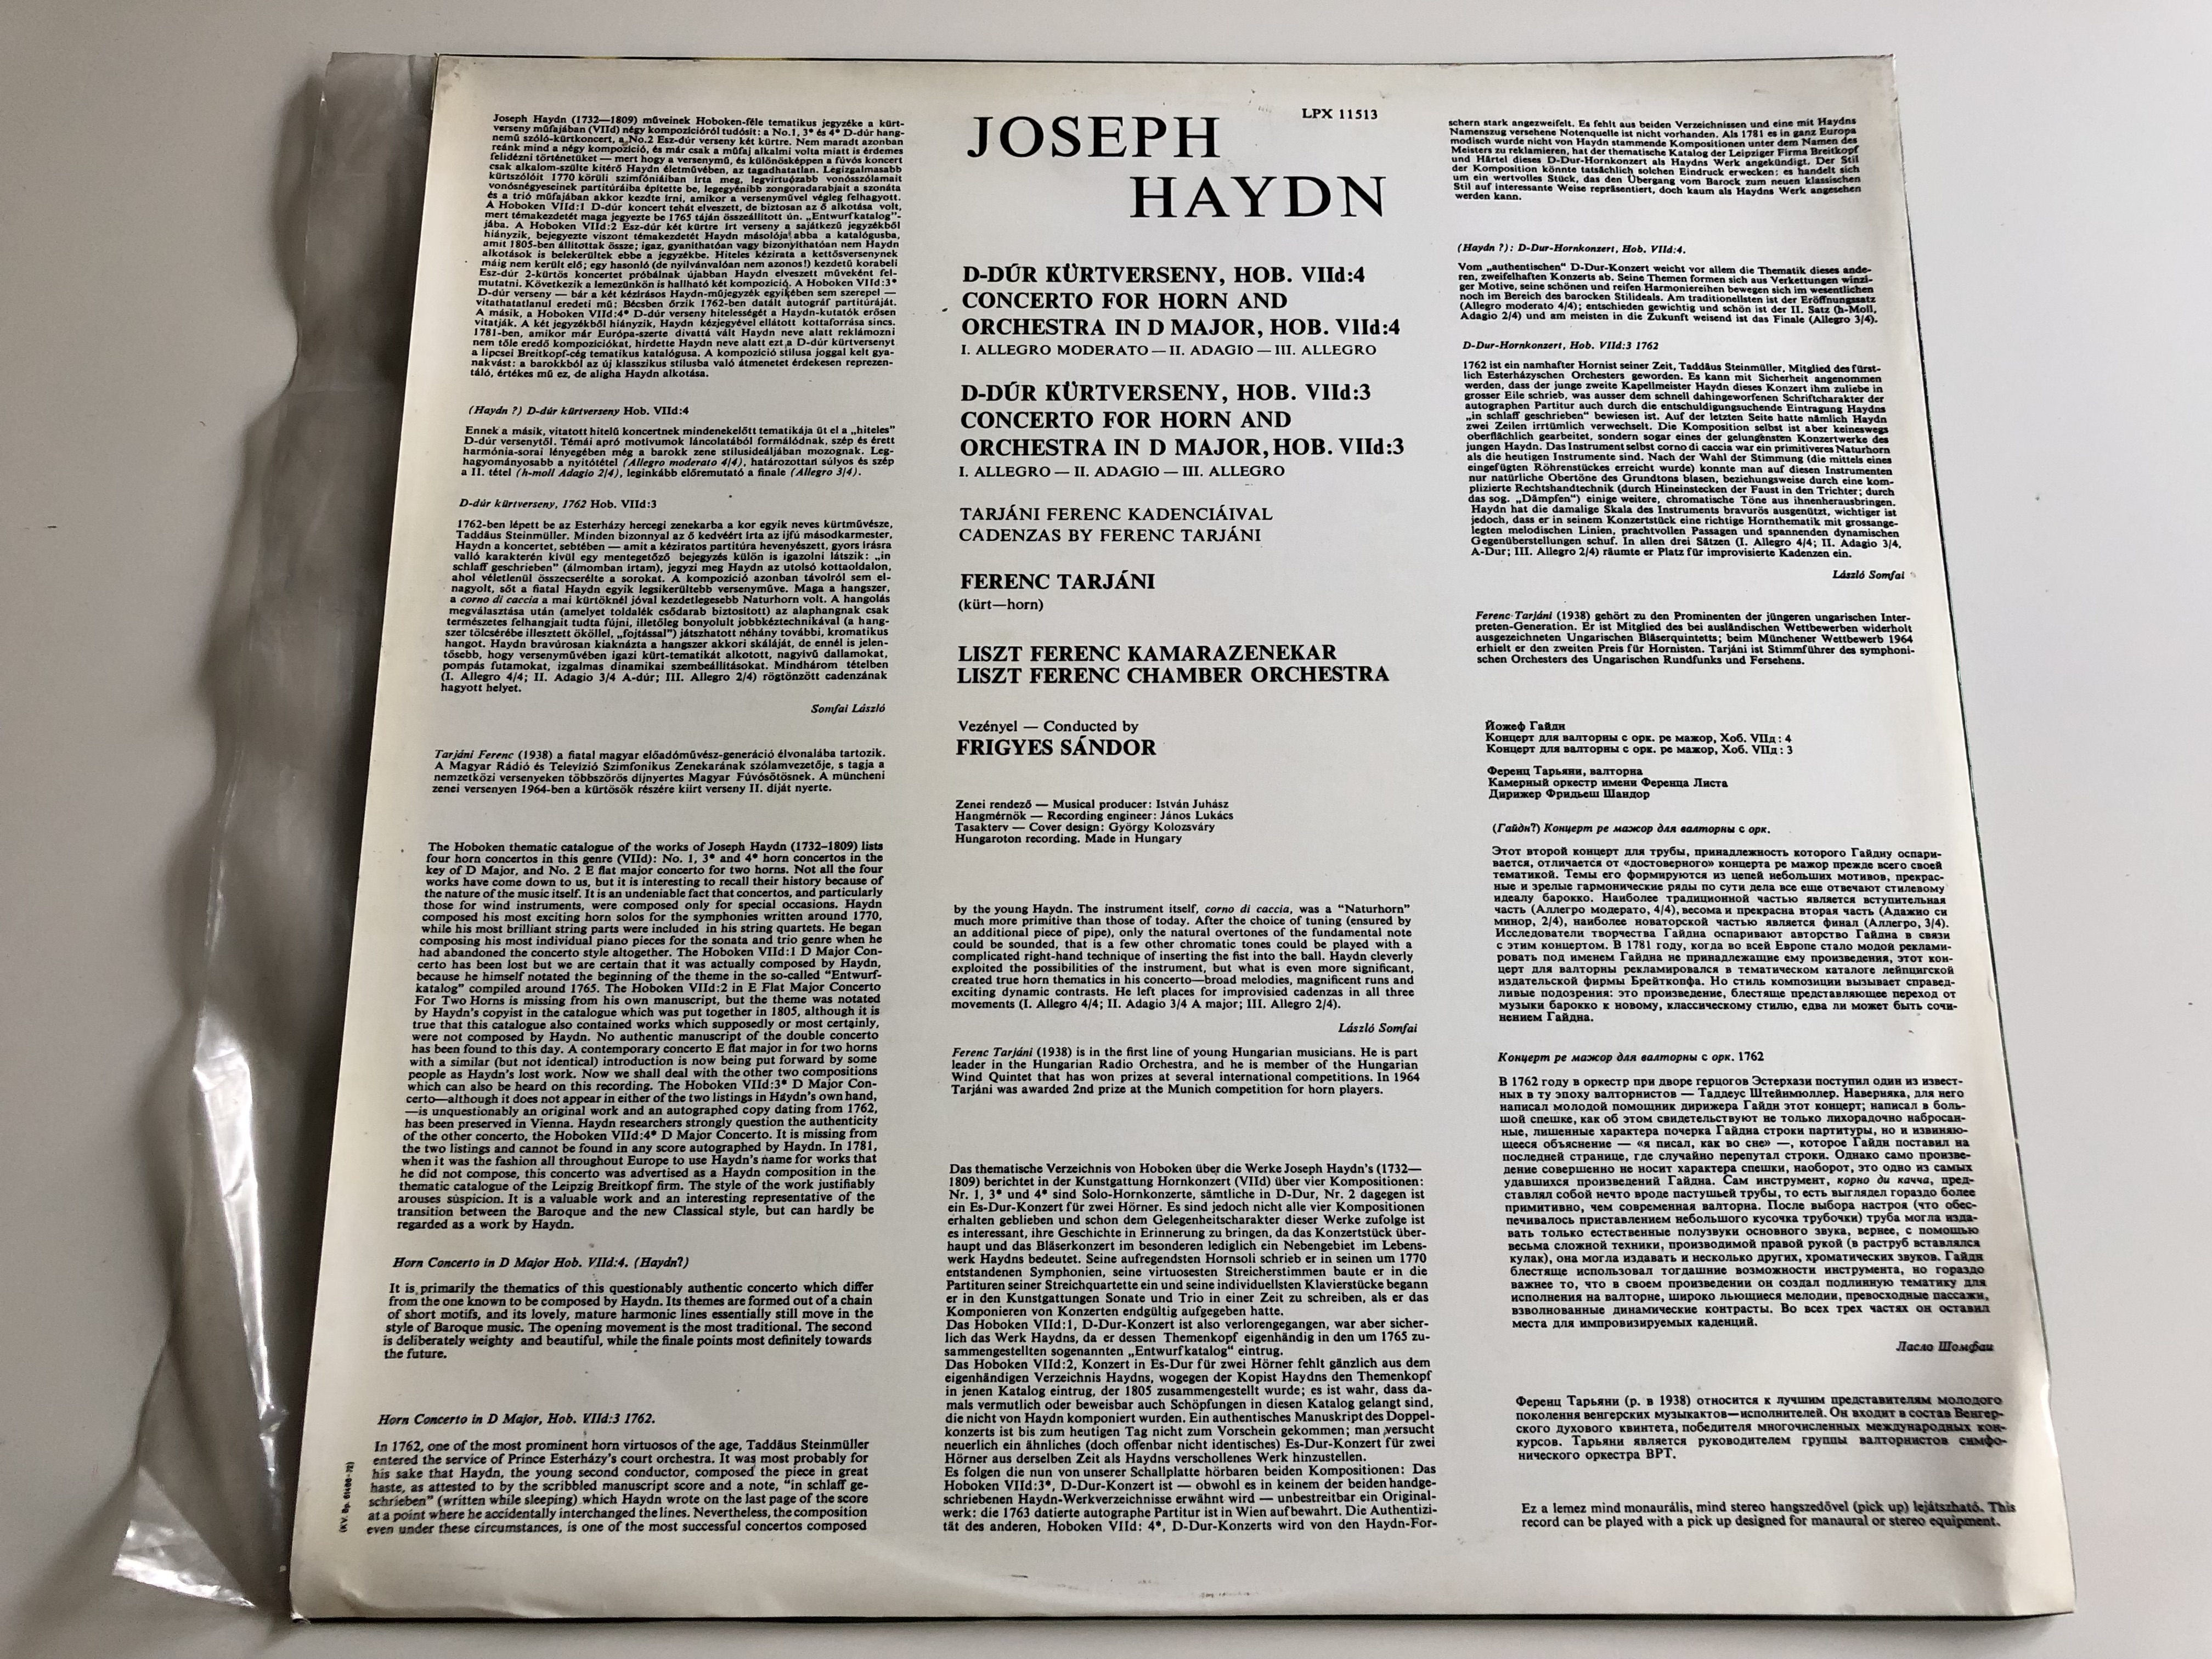 j.haydn-concertos-for-horn-in-d-major-nos.-1-2-f.-tarj-ni-conducted-f.-s-ndor-liszt-ferenc-chamber-orchestra-hungaroton-lp-stereo-mono-lpx-11513-2-.jpg